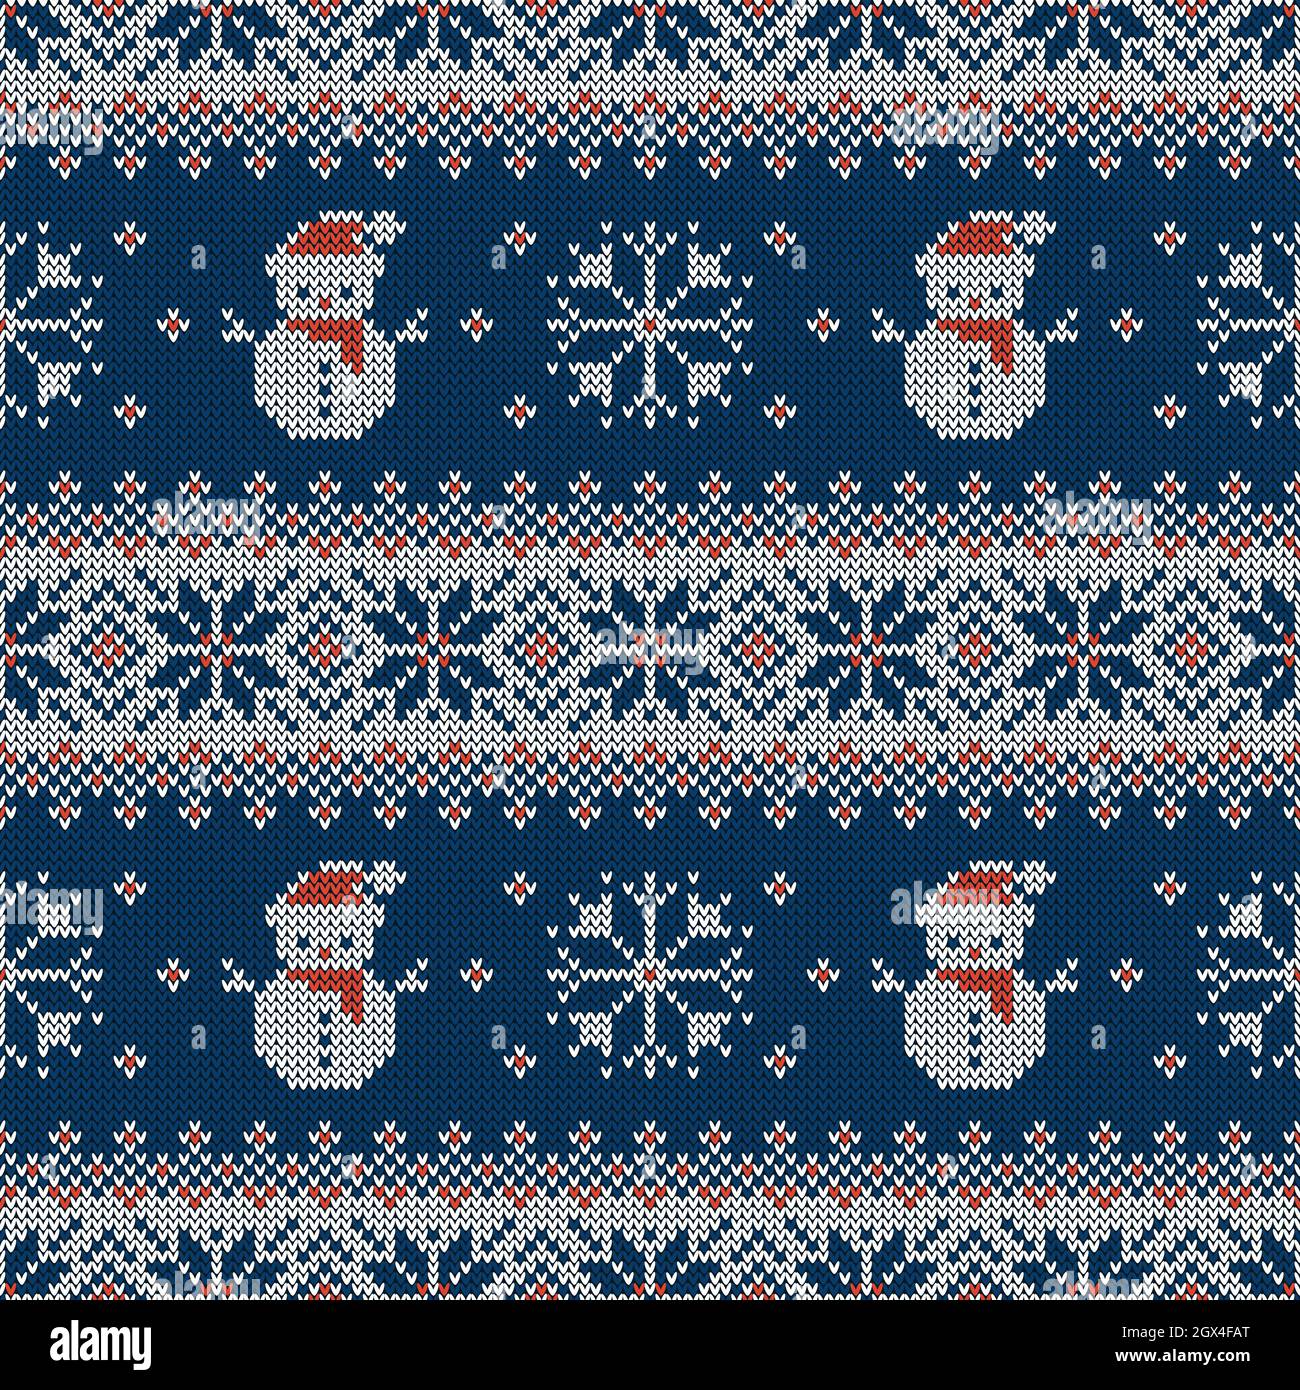 Knitted seamless pattern with snowman, snowflakes, and scandinavian ornament. Sweater background for Christmas, New Year or winter design. Vector Stock Vector